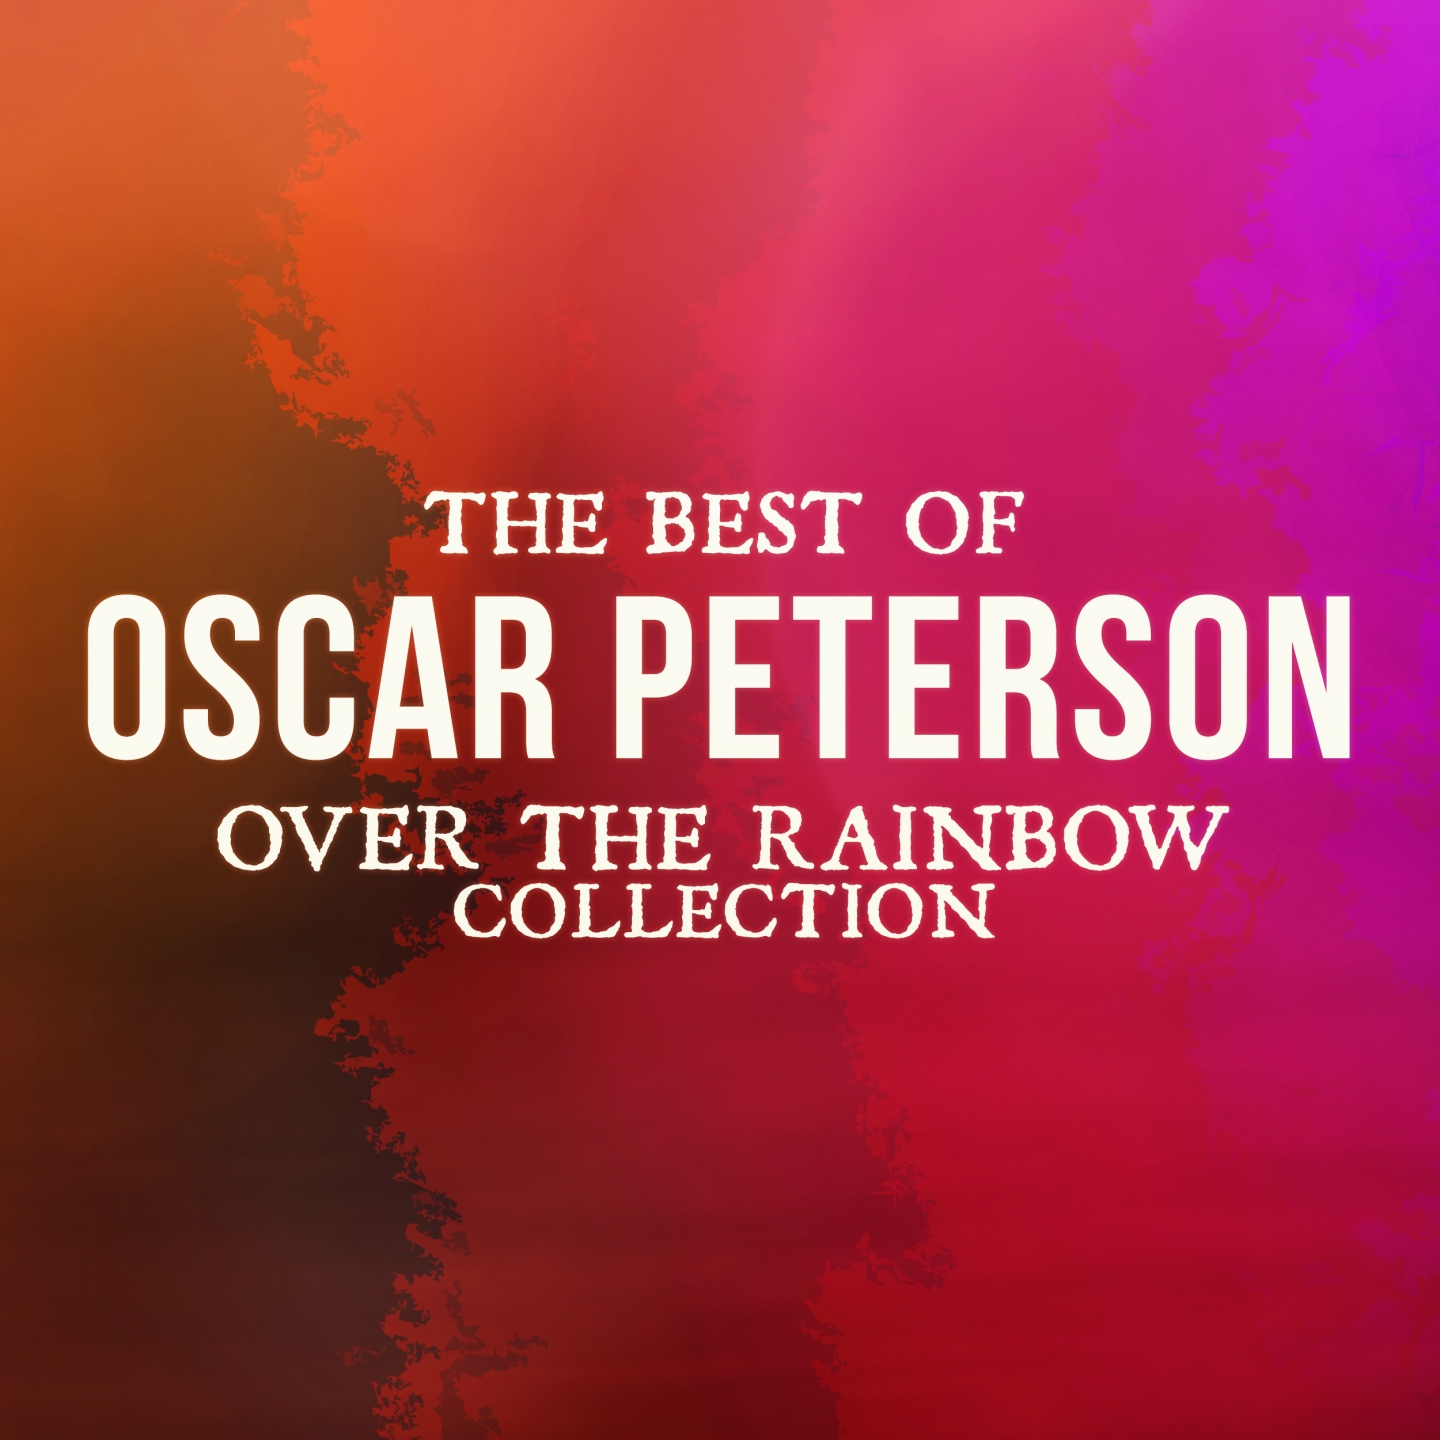 The Best of Oscar Peterson (Over the Rainbow Collection)